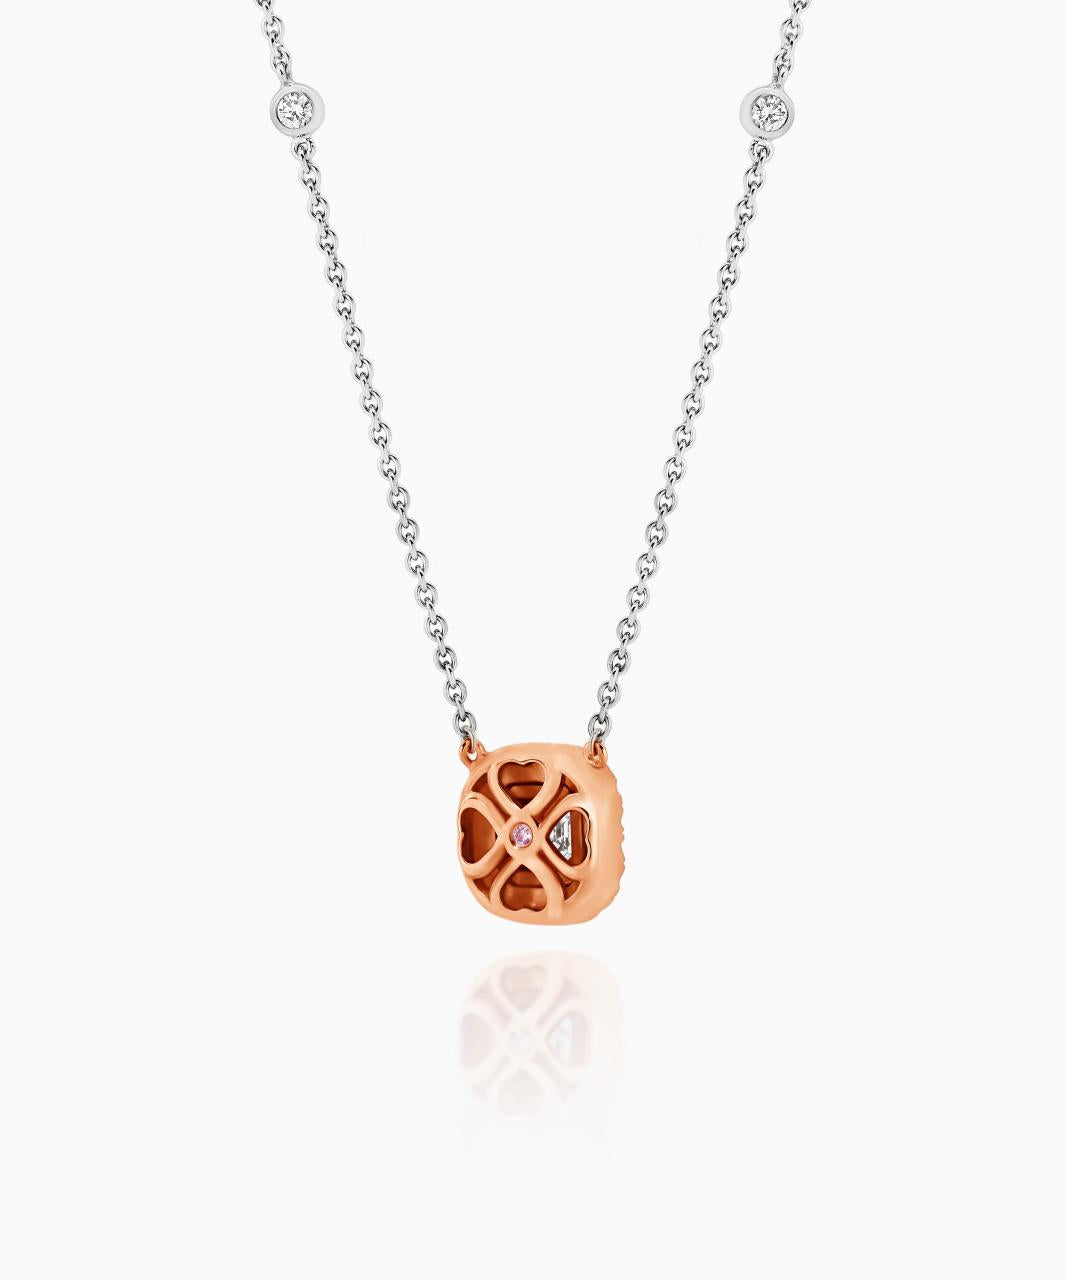 Lucie White and Argyle Pink Diamond Necklace